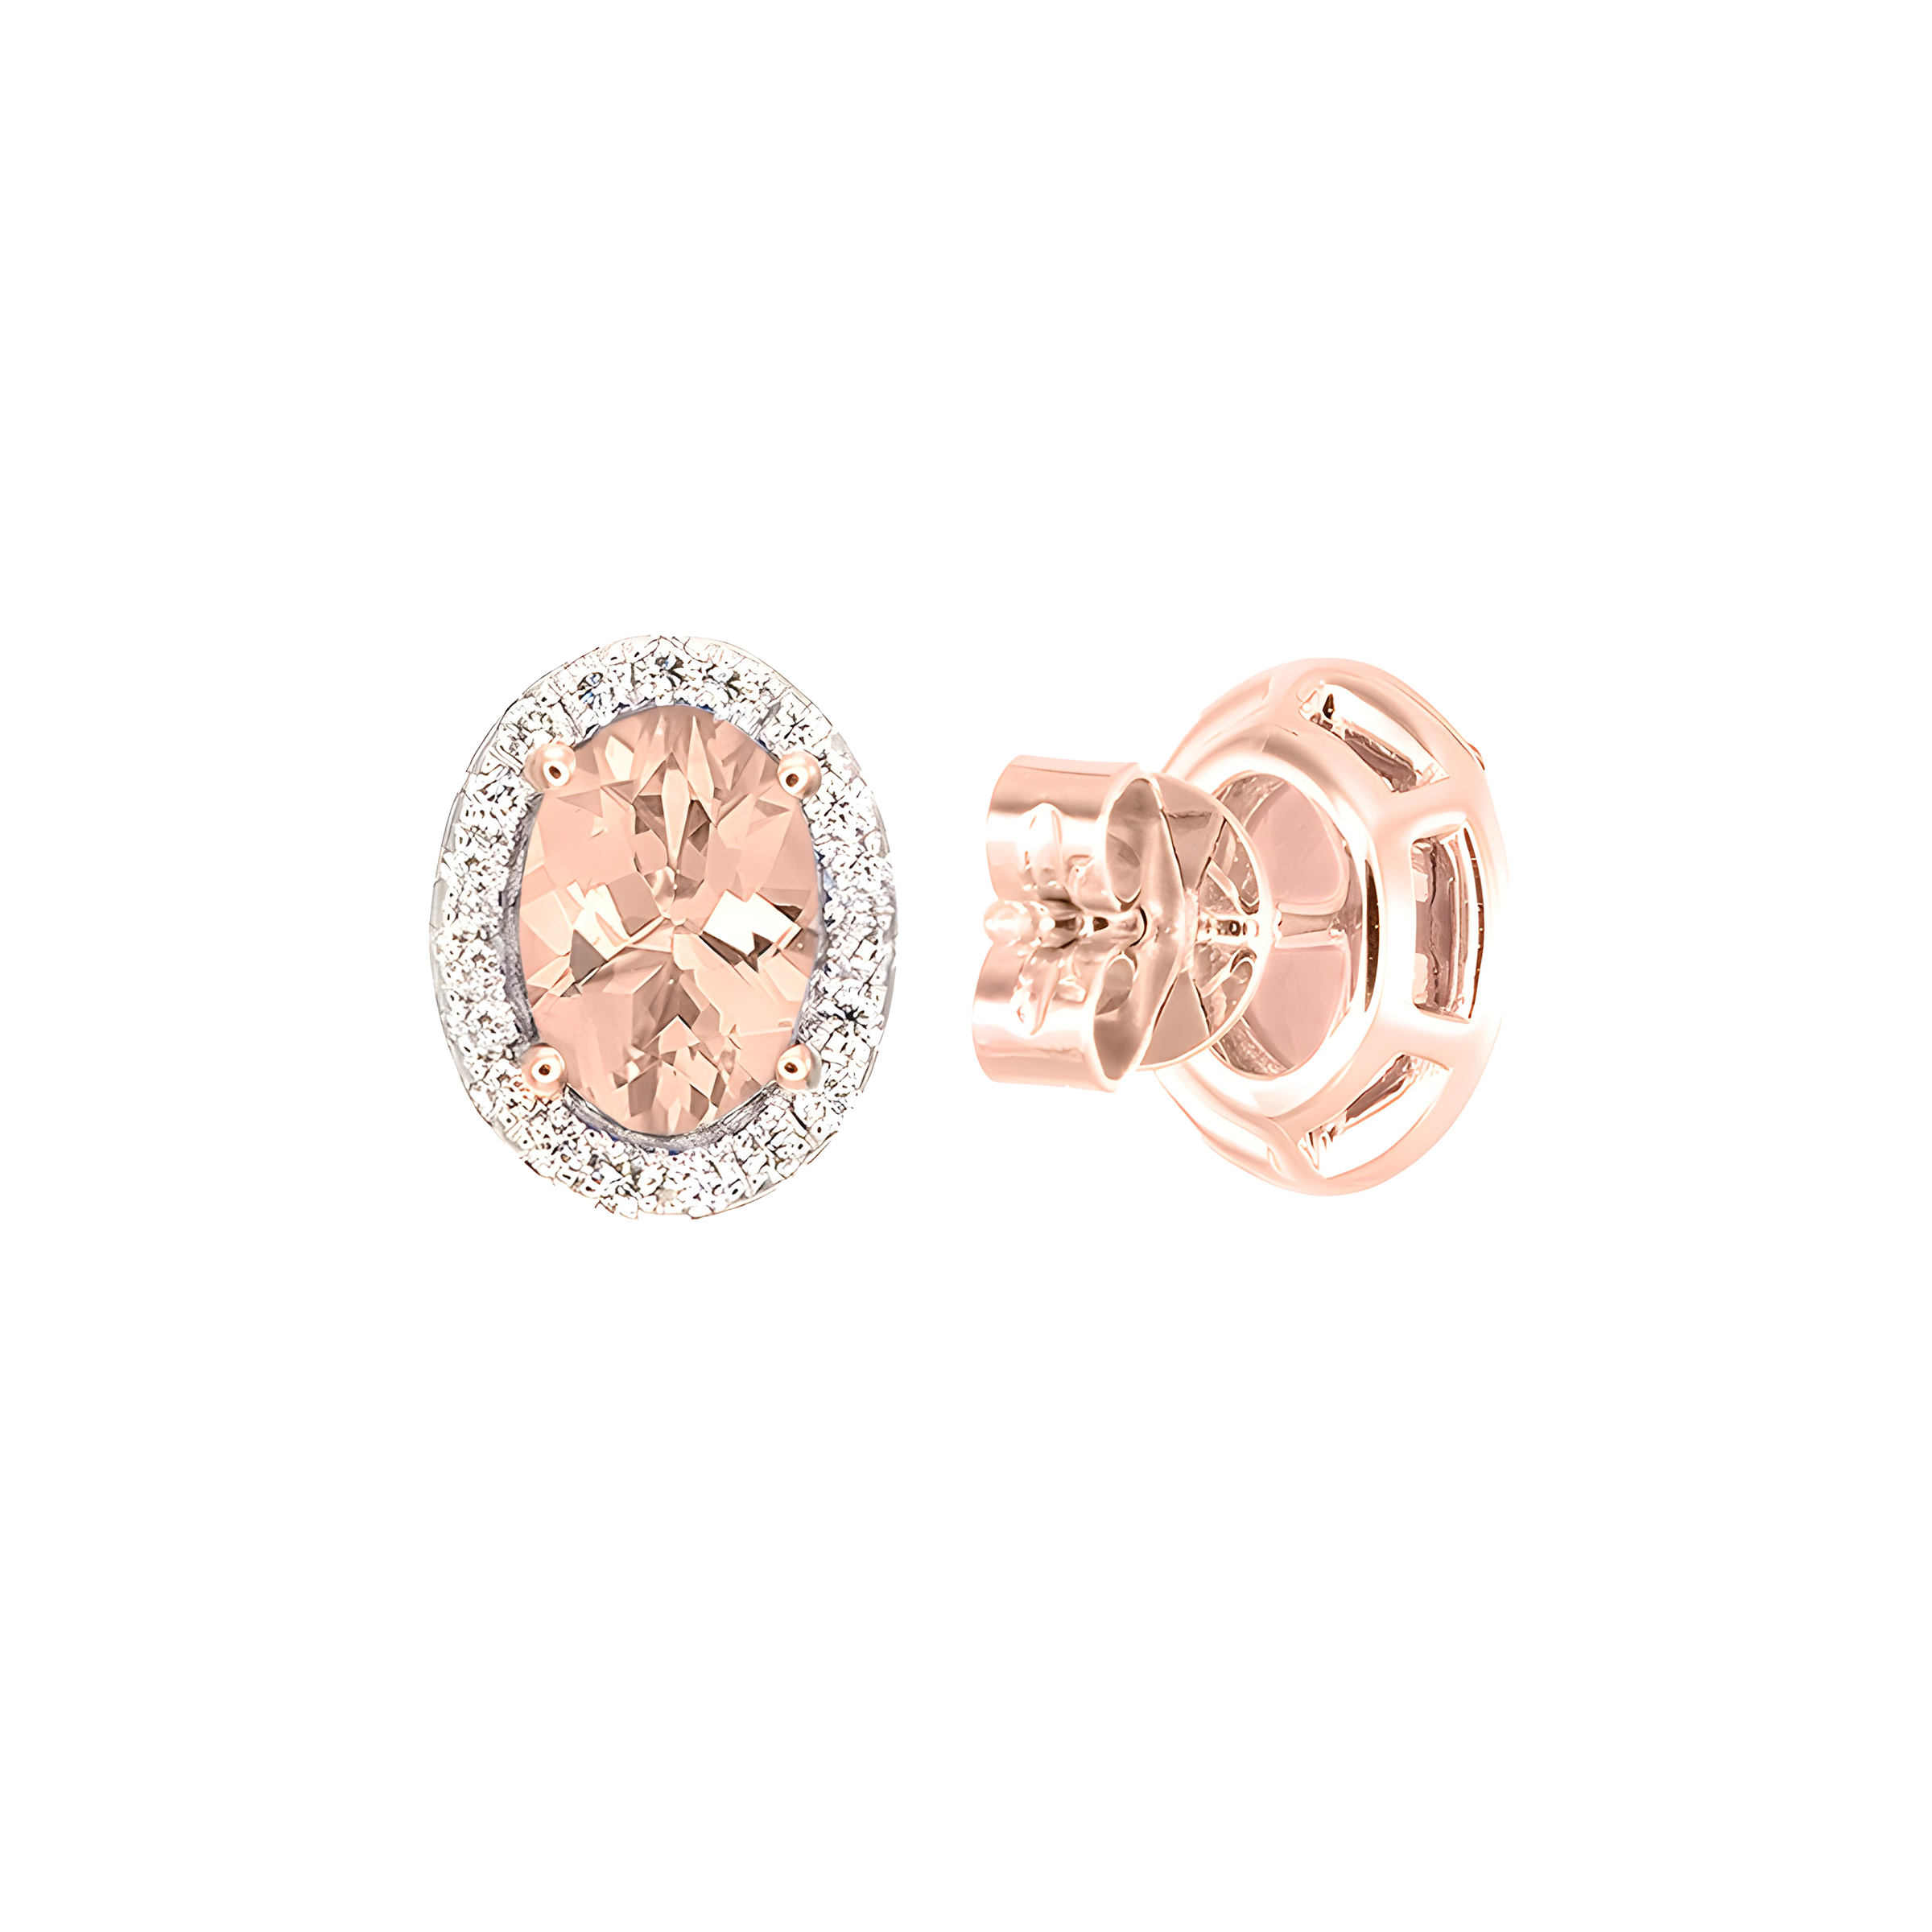 Oval Morganite And Diamond Halo Stud Earrings in 18k Rose Gold